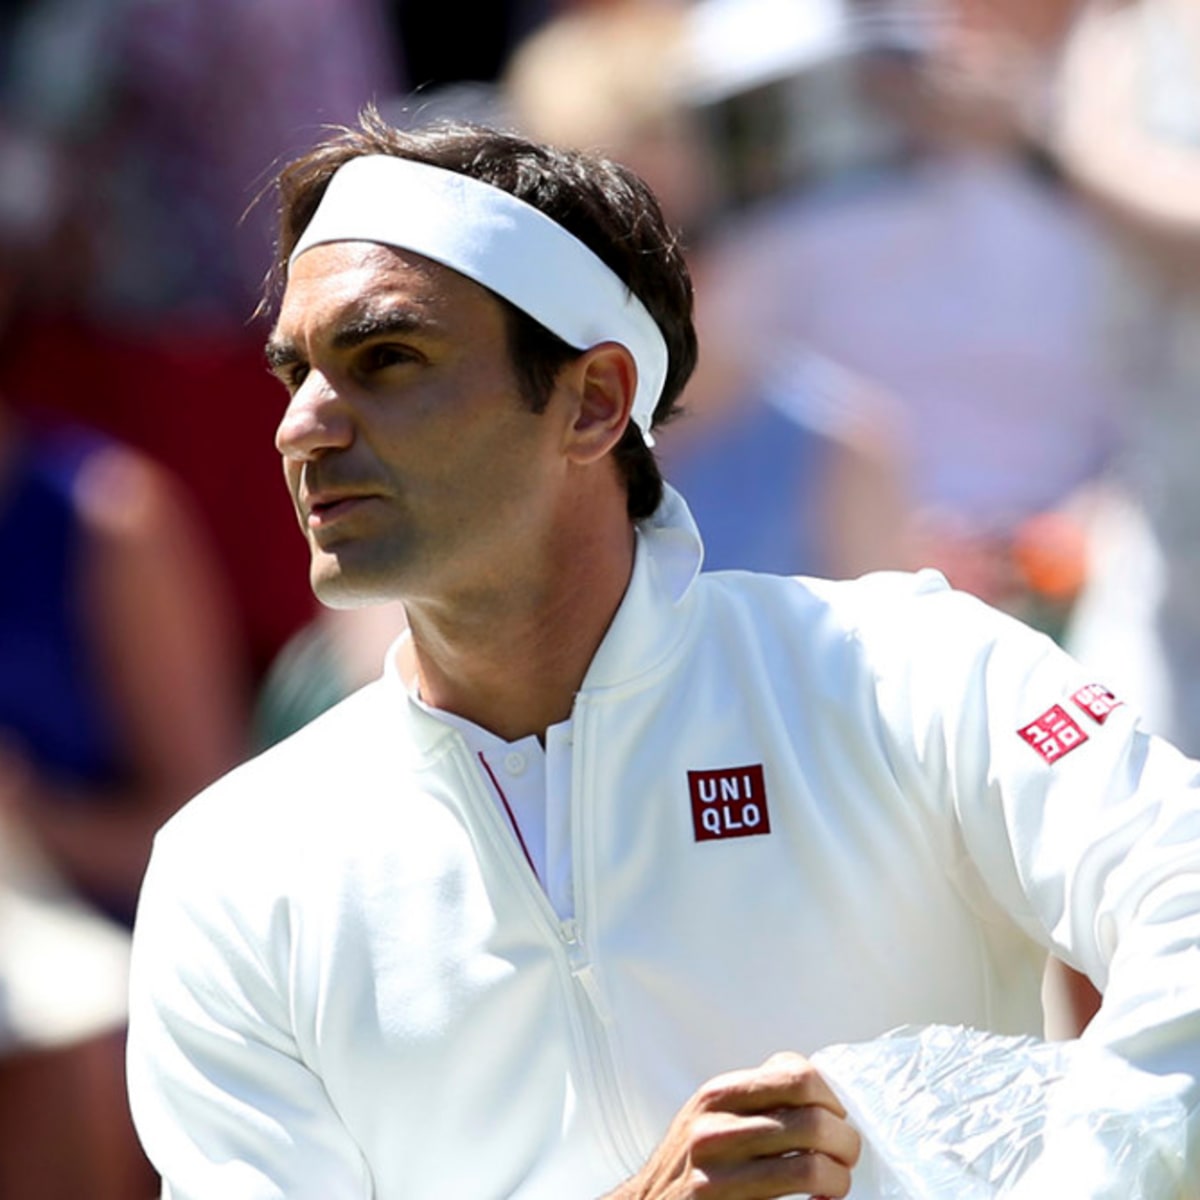 Letting Roger Federer leave Nike for Uniqlo was an atrocity says former  Nike tennis director  KTVZ